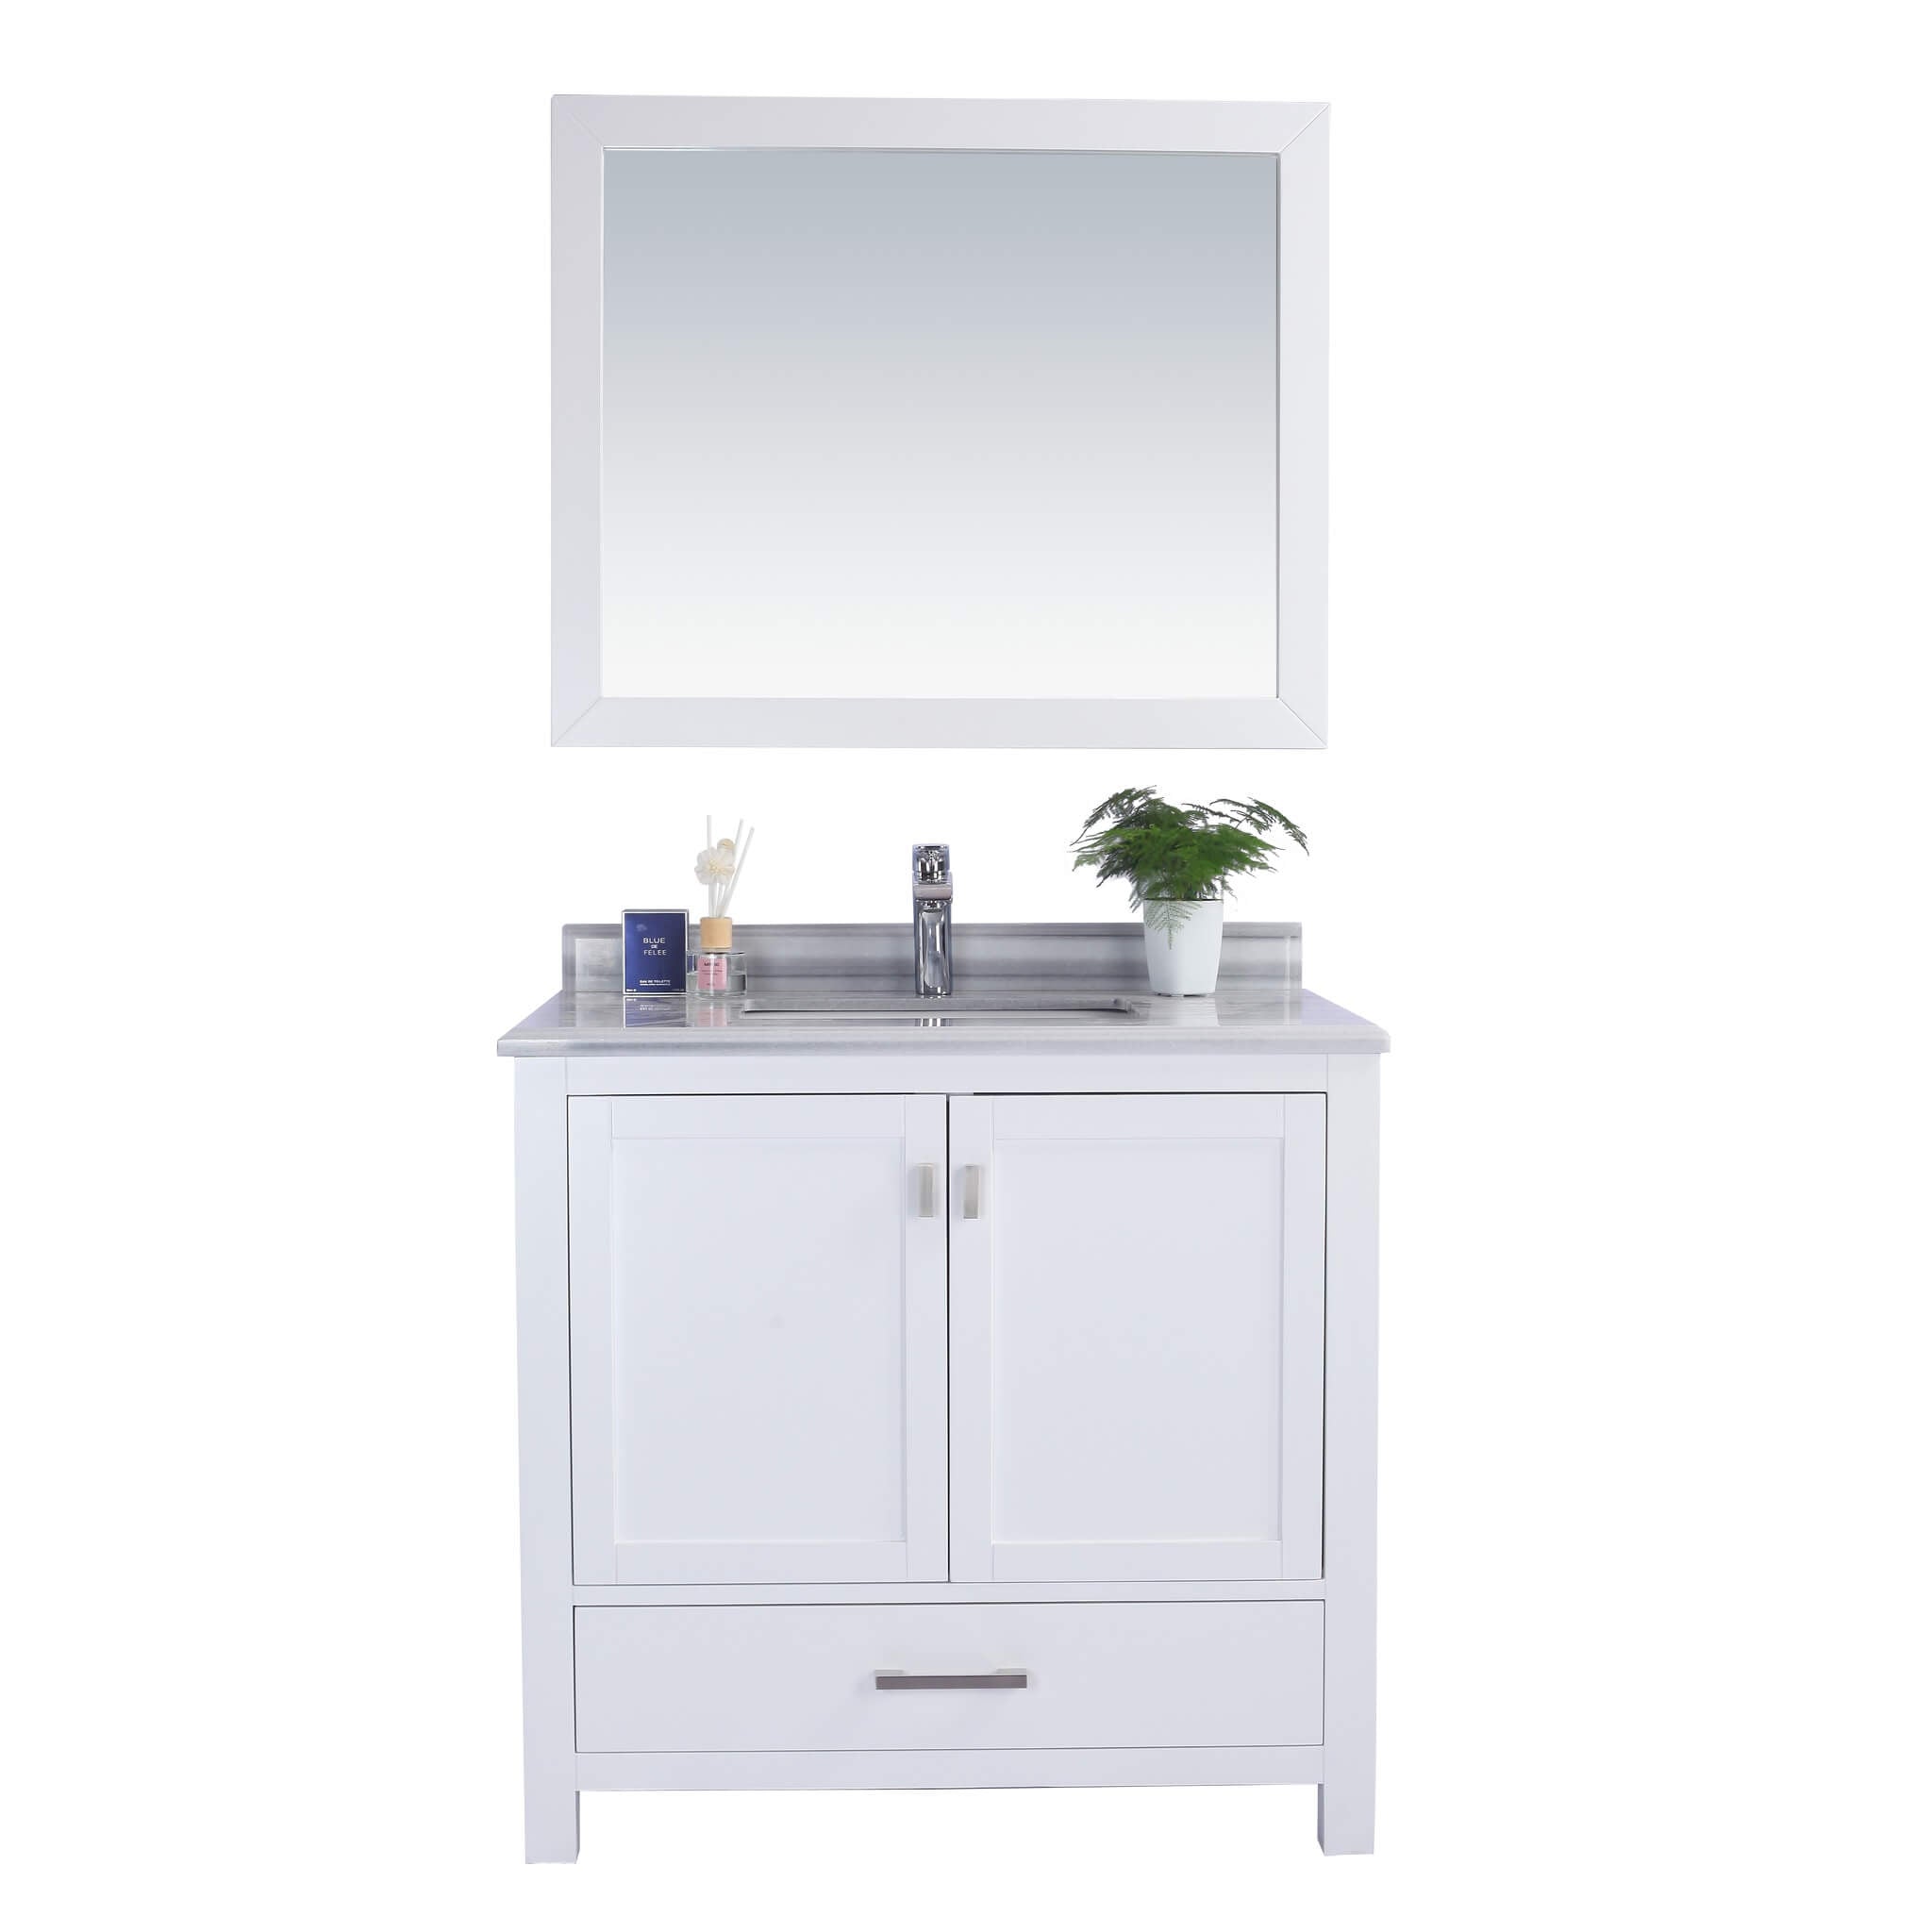 LAVIVA Wilson 313ANG-36W-WS 36" Single Bathroom Vanity in White with White Stripes Marble, White Rectangle Sink, Front View